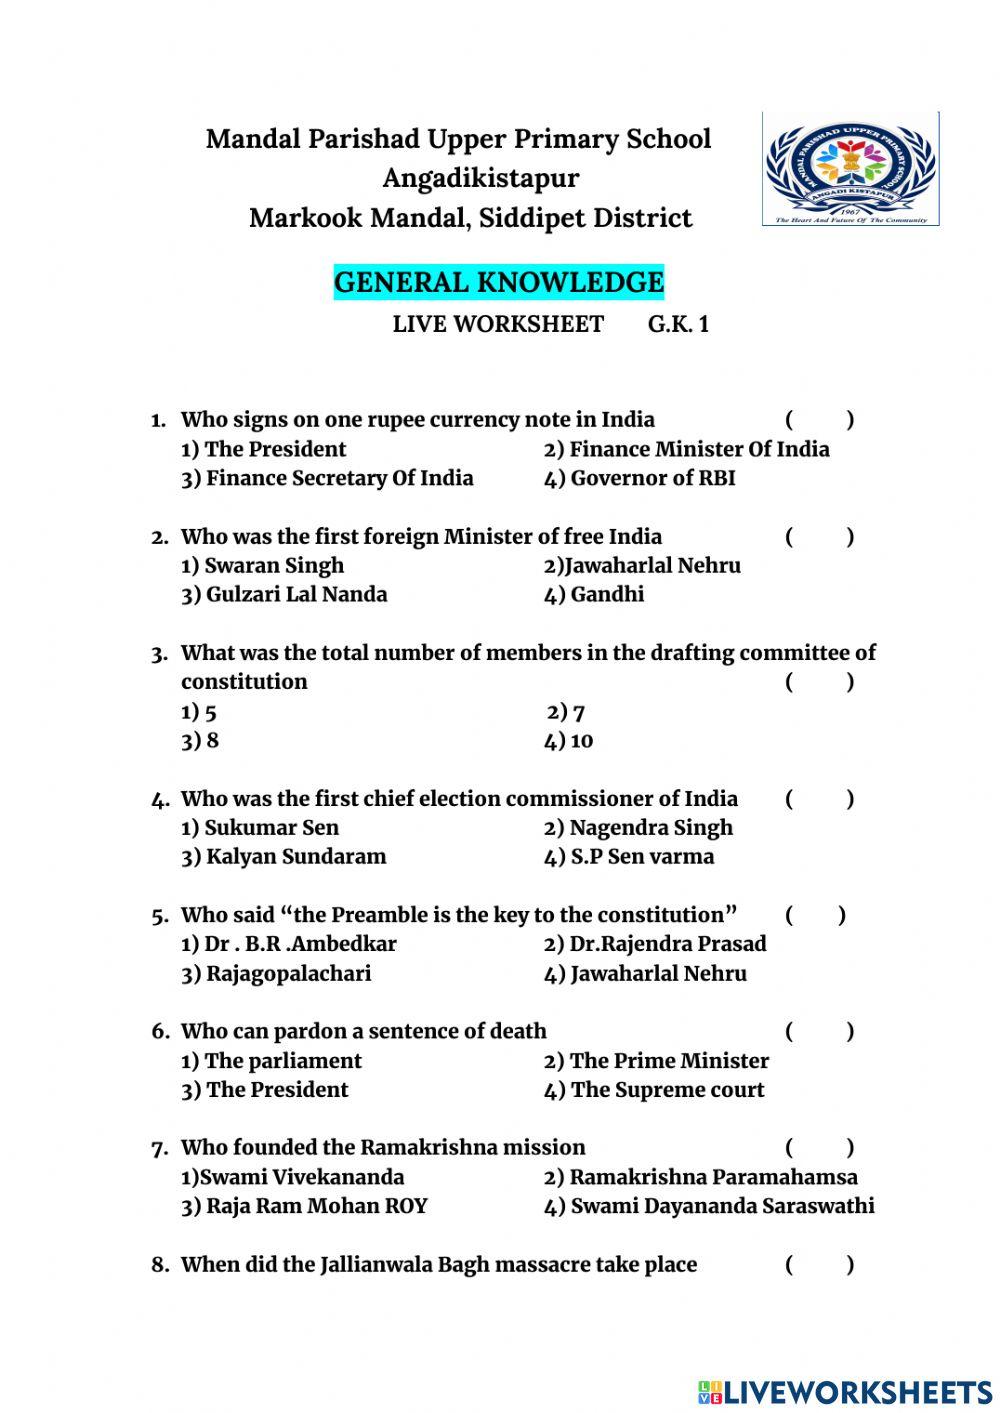 General Knowledge questions